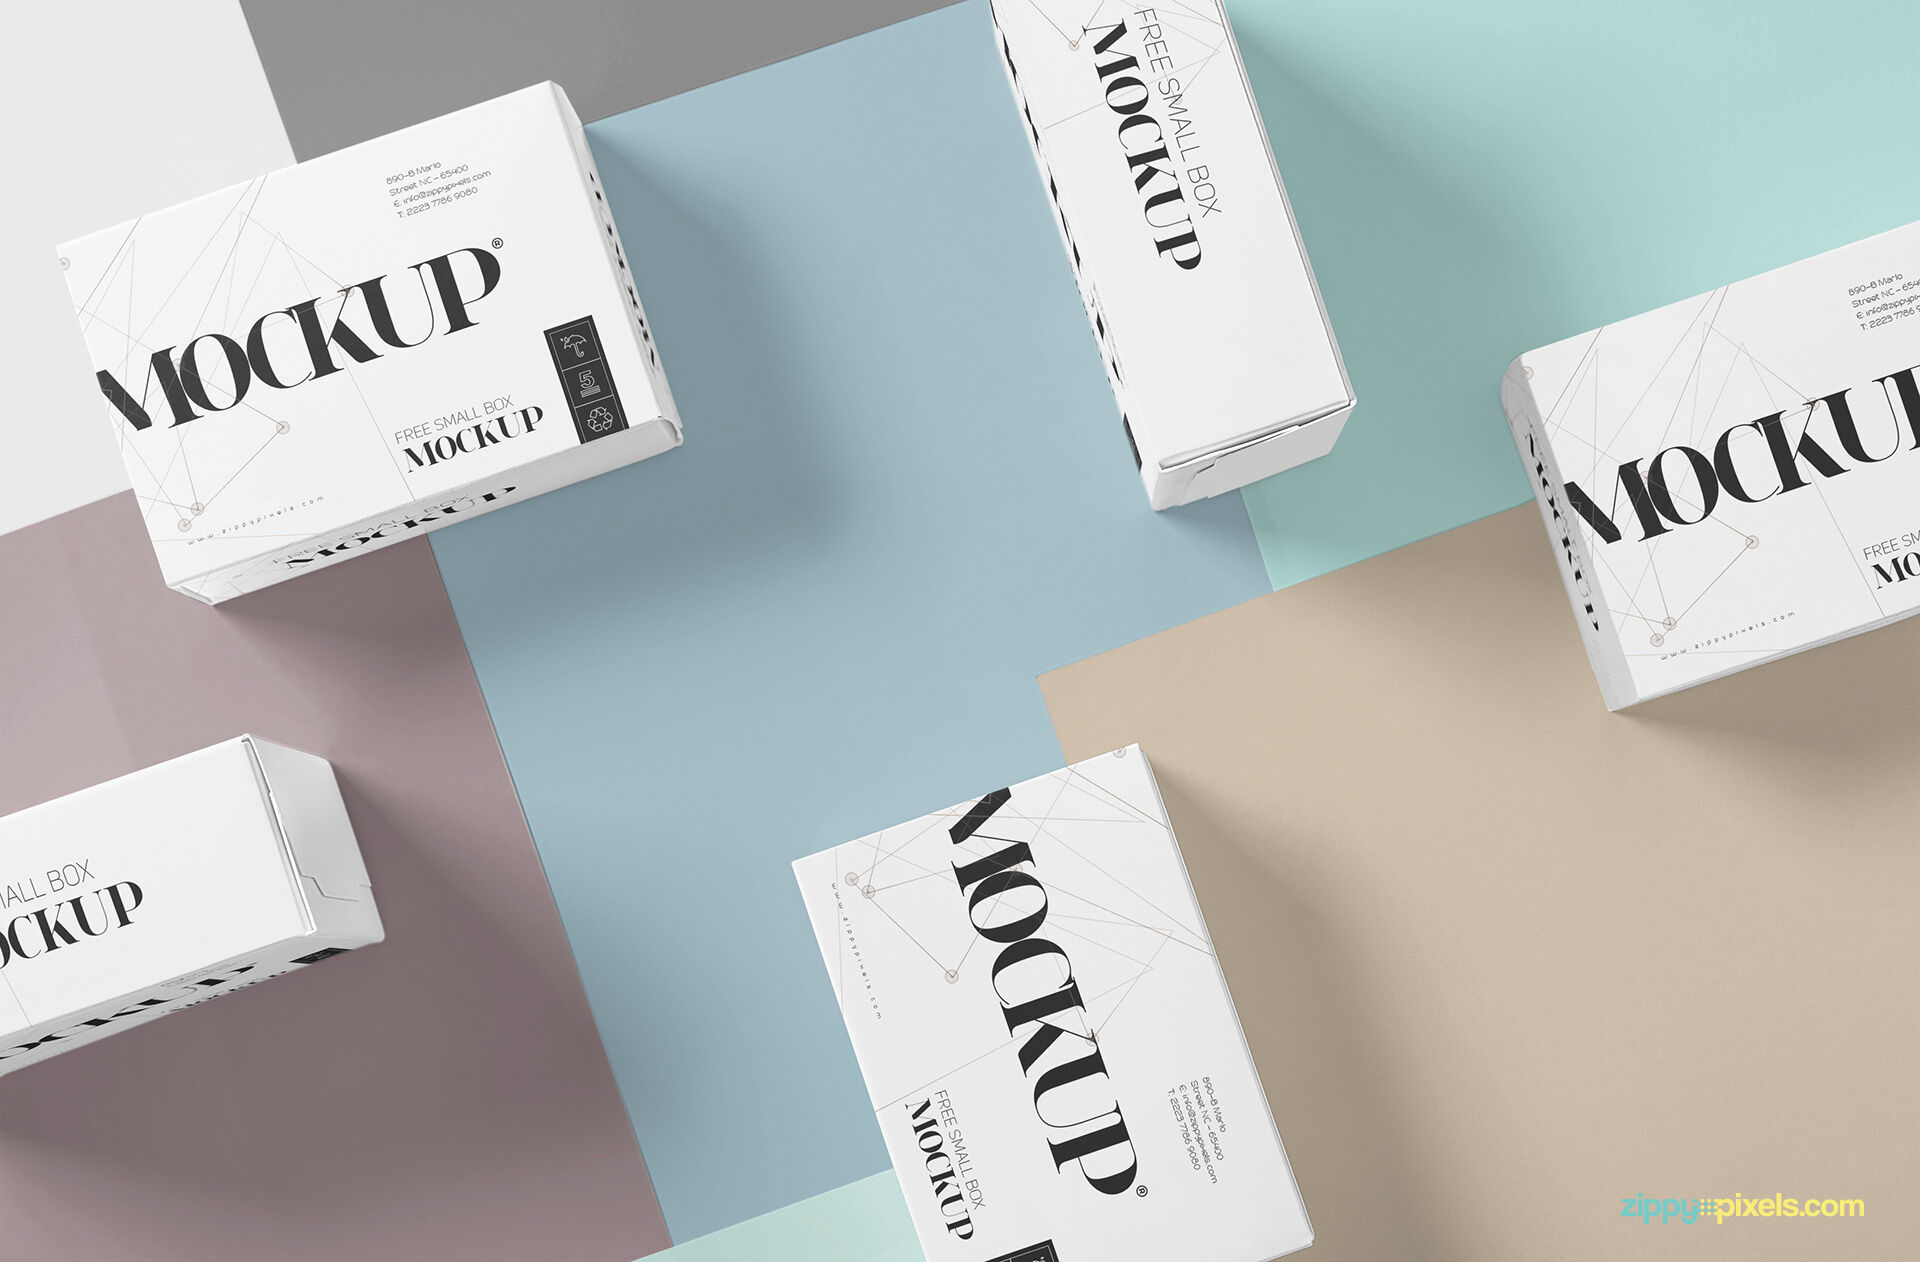 Mockup Featuring 5 Packaging Boxes in Different Angles FREE PSD